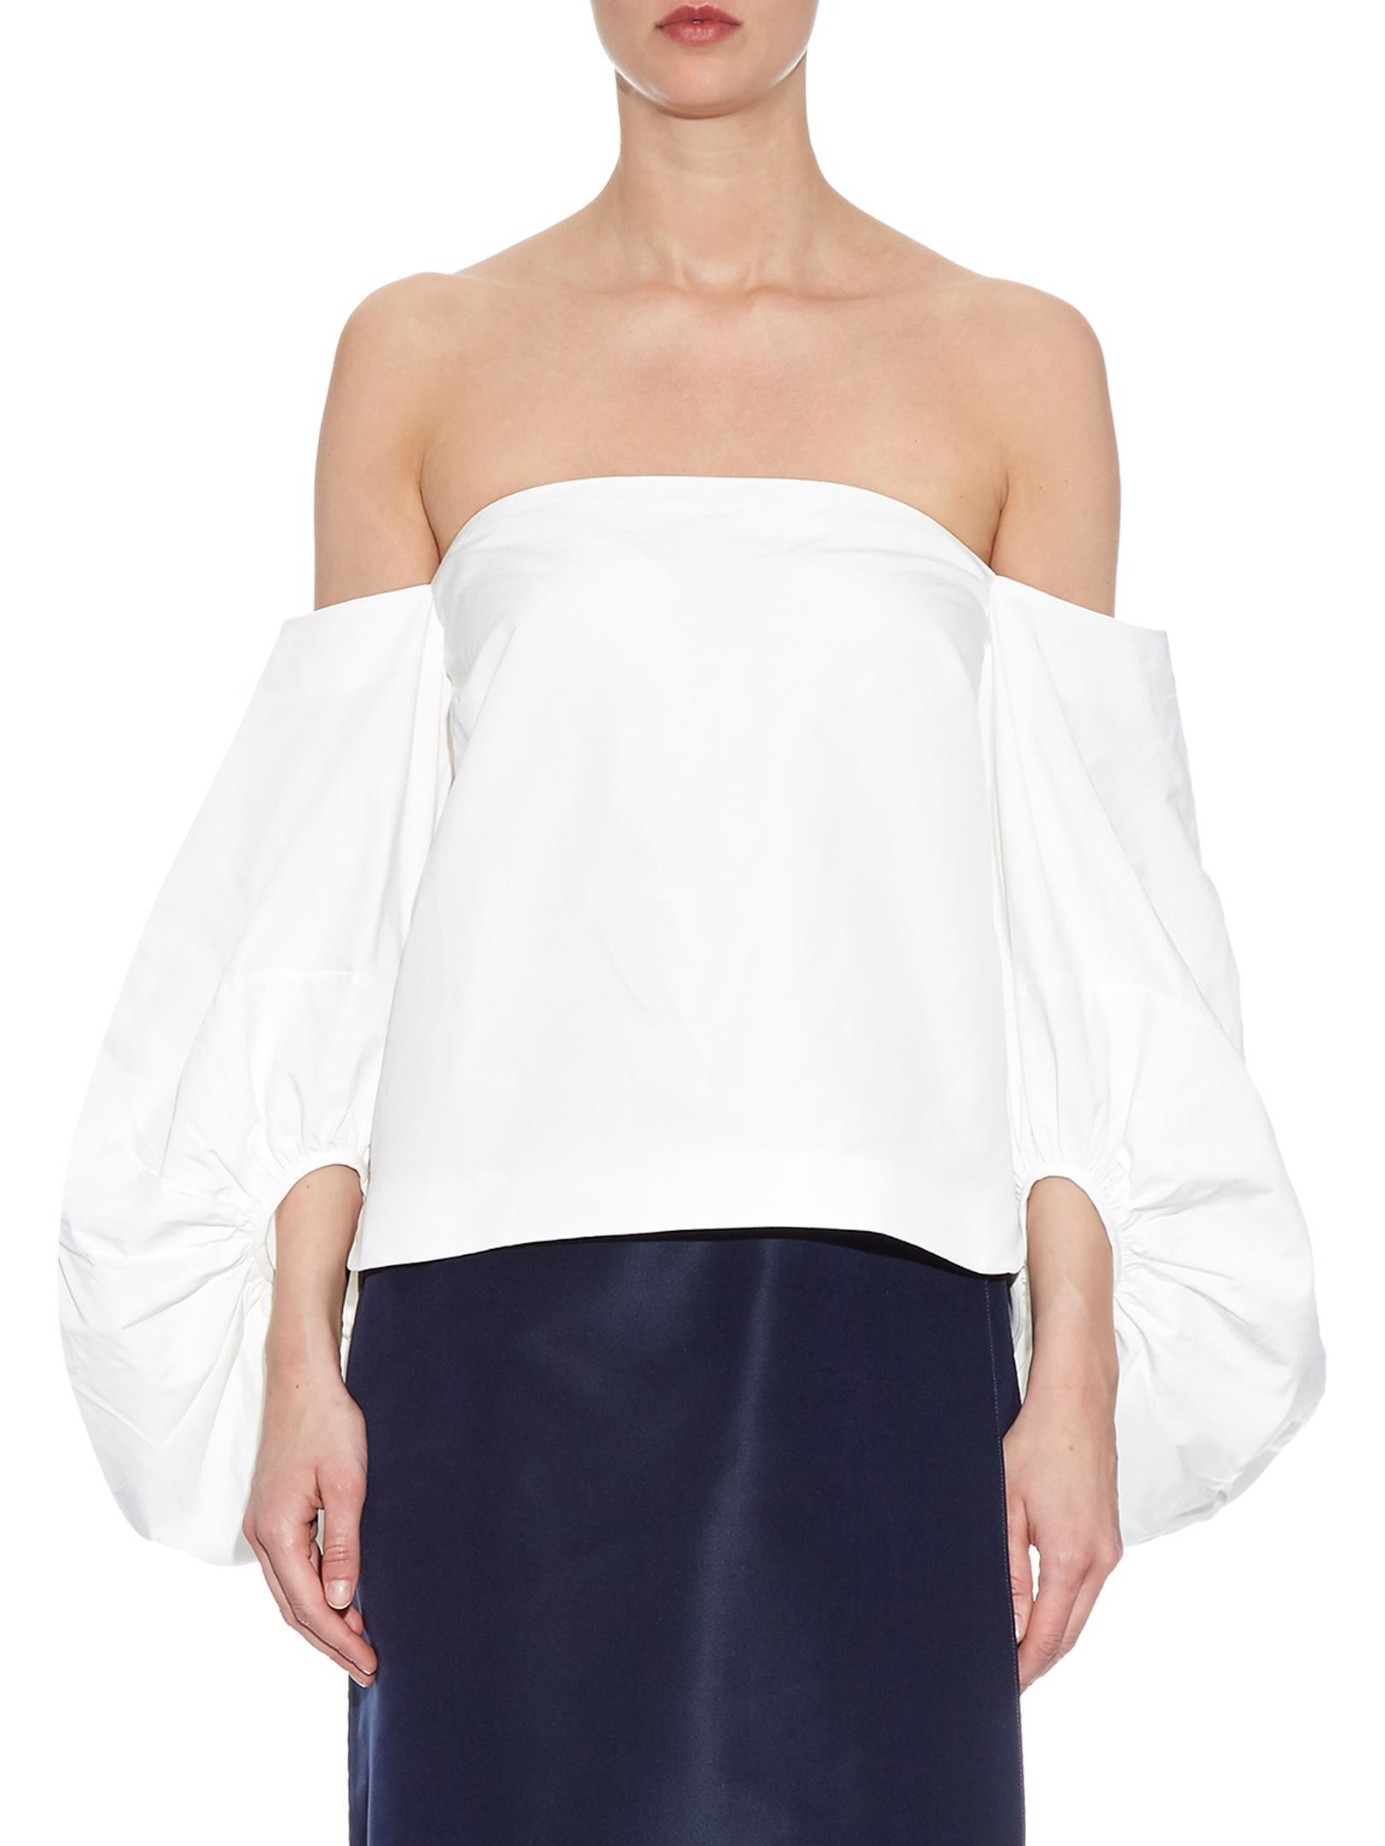 Rosie Assoulin Off-The-Shoulder Balloon-Sleeved Top in White - Lyst